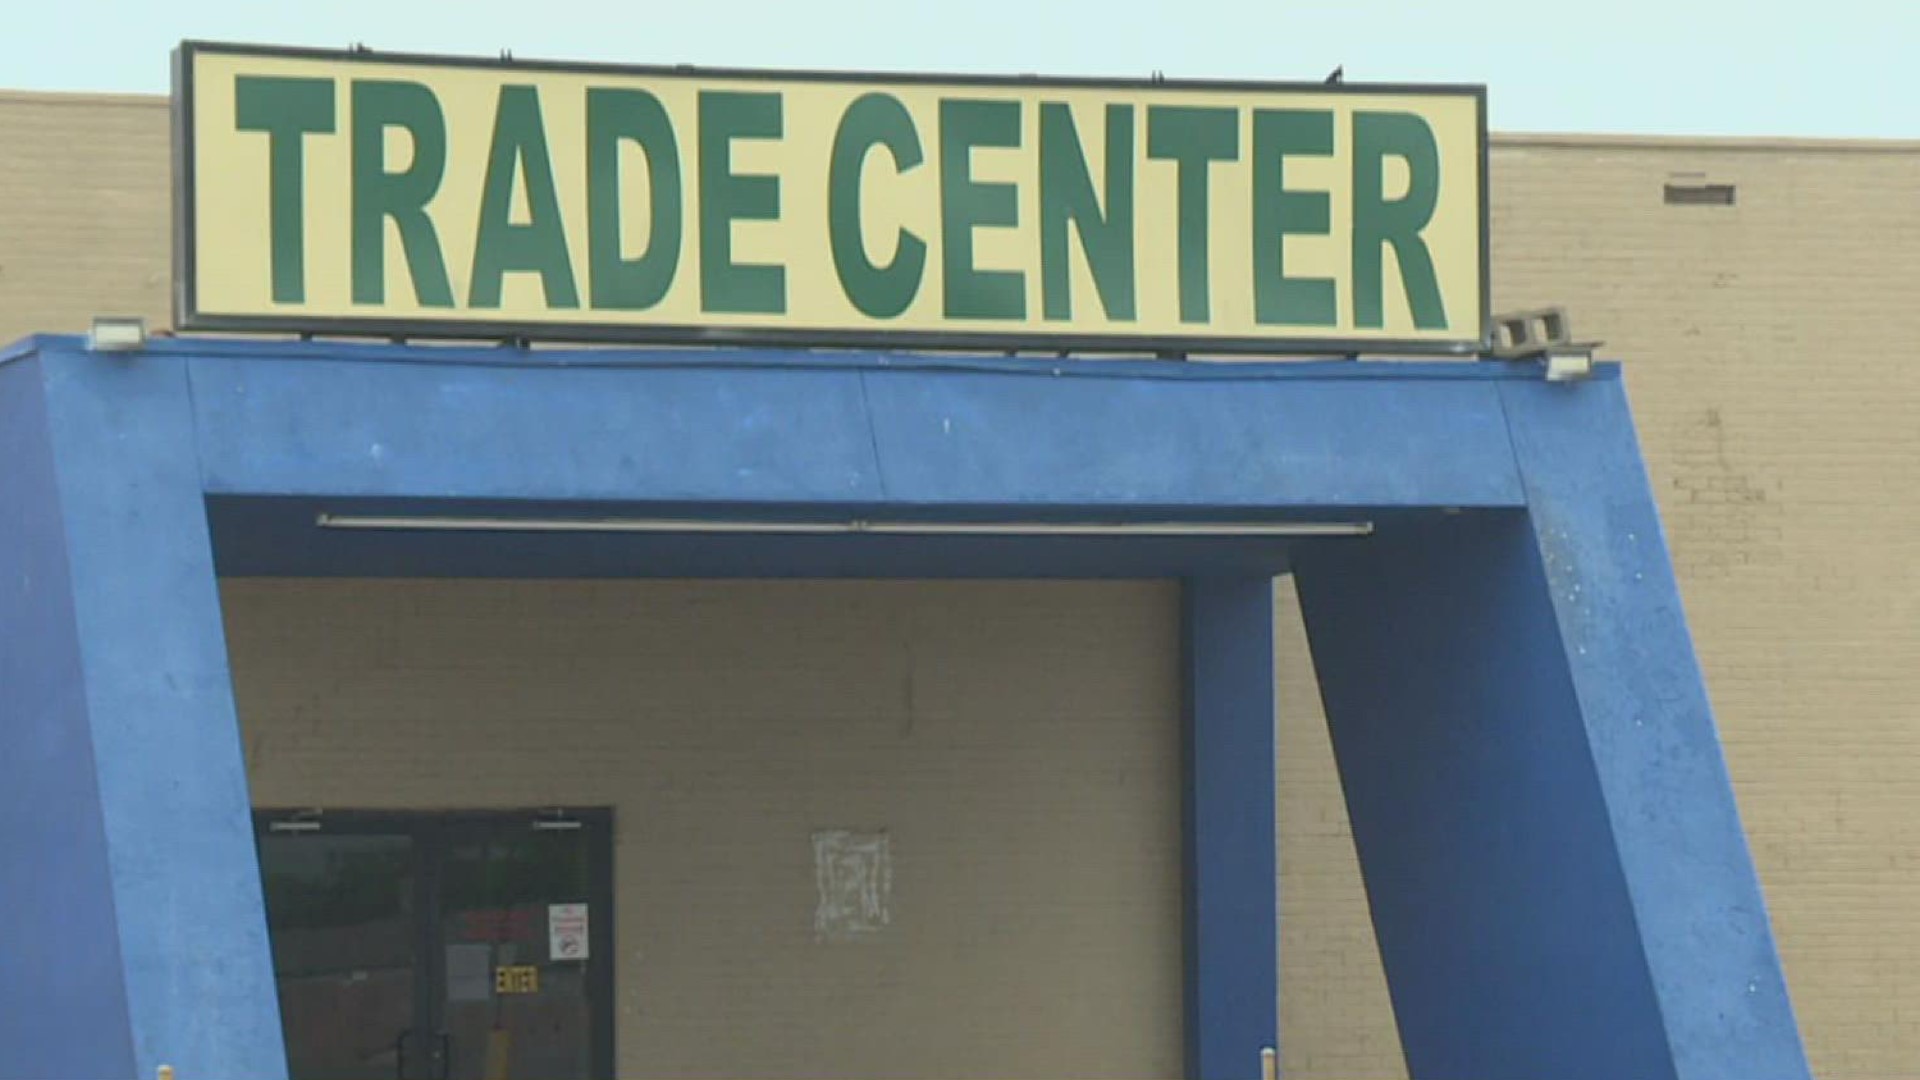 The Trade Center hopes to have their doors open by this Friday.